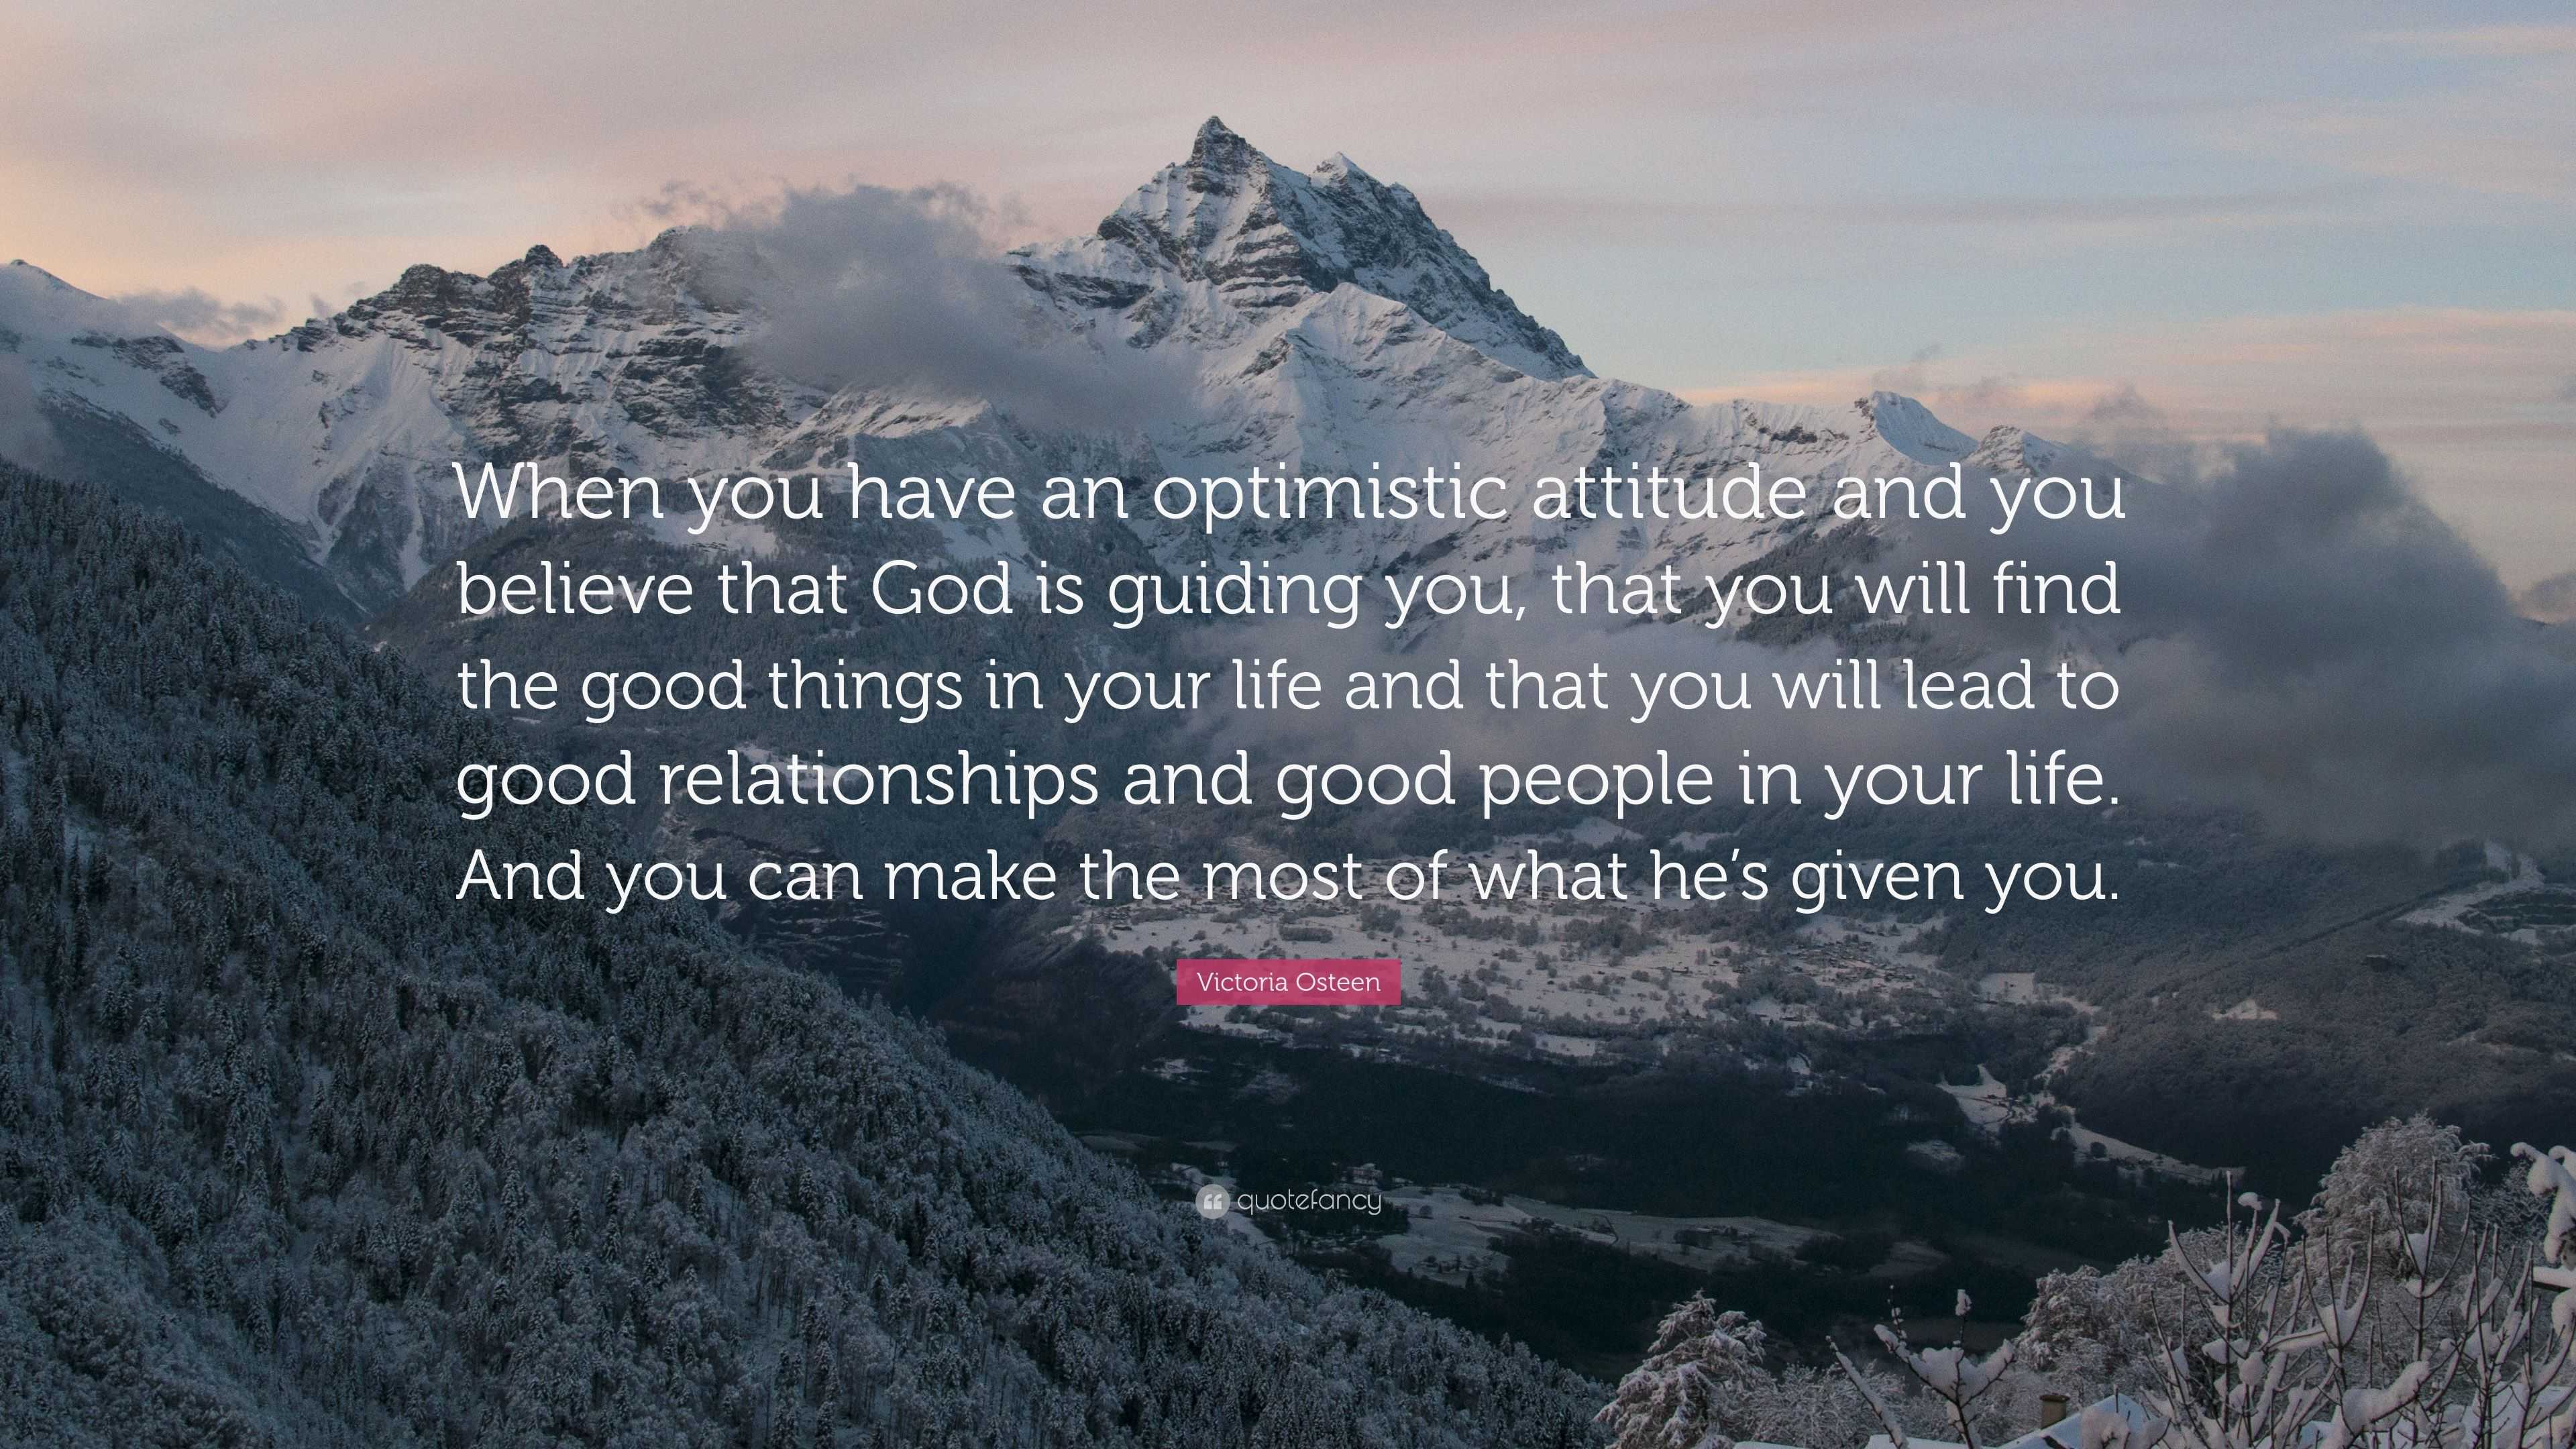 Victoria Osteen Quote “When you have an optimistic attitude and you believe that God